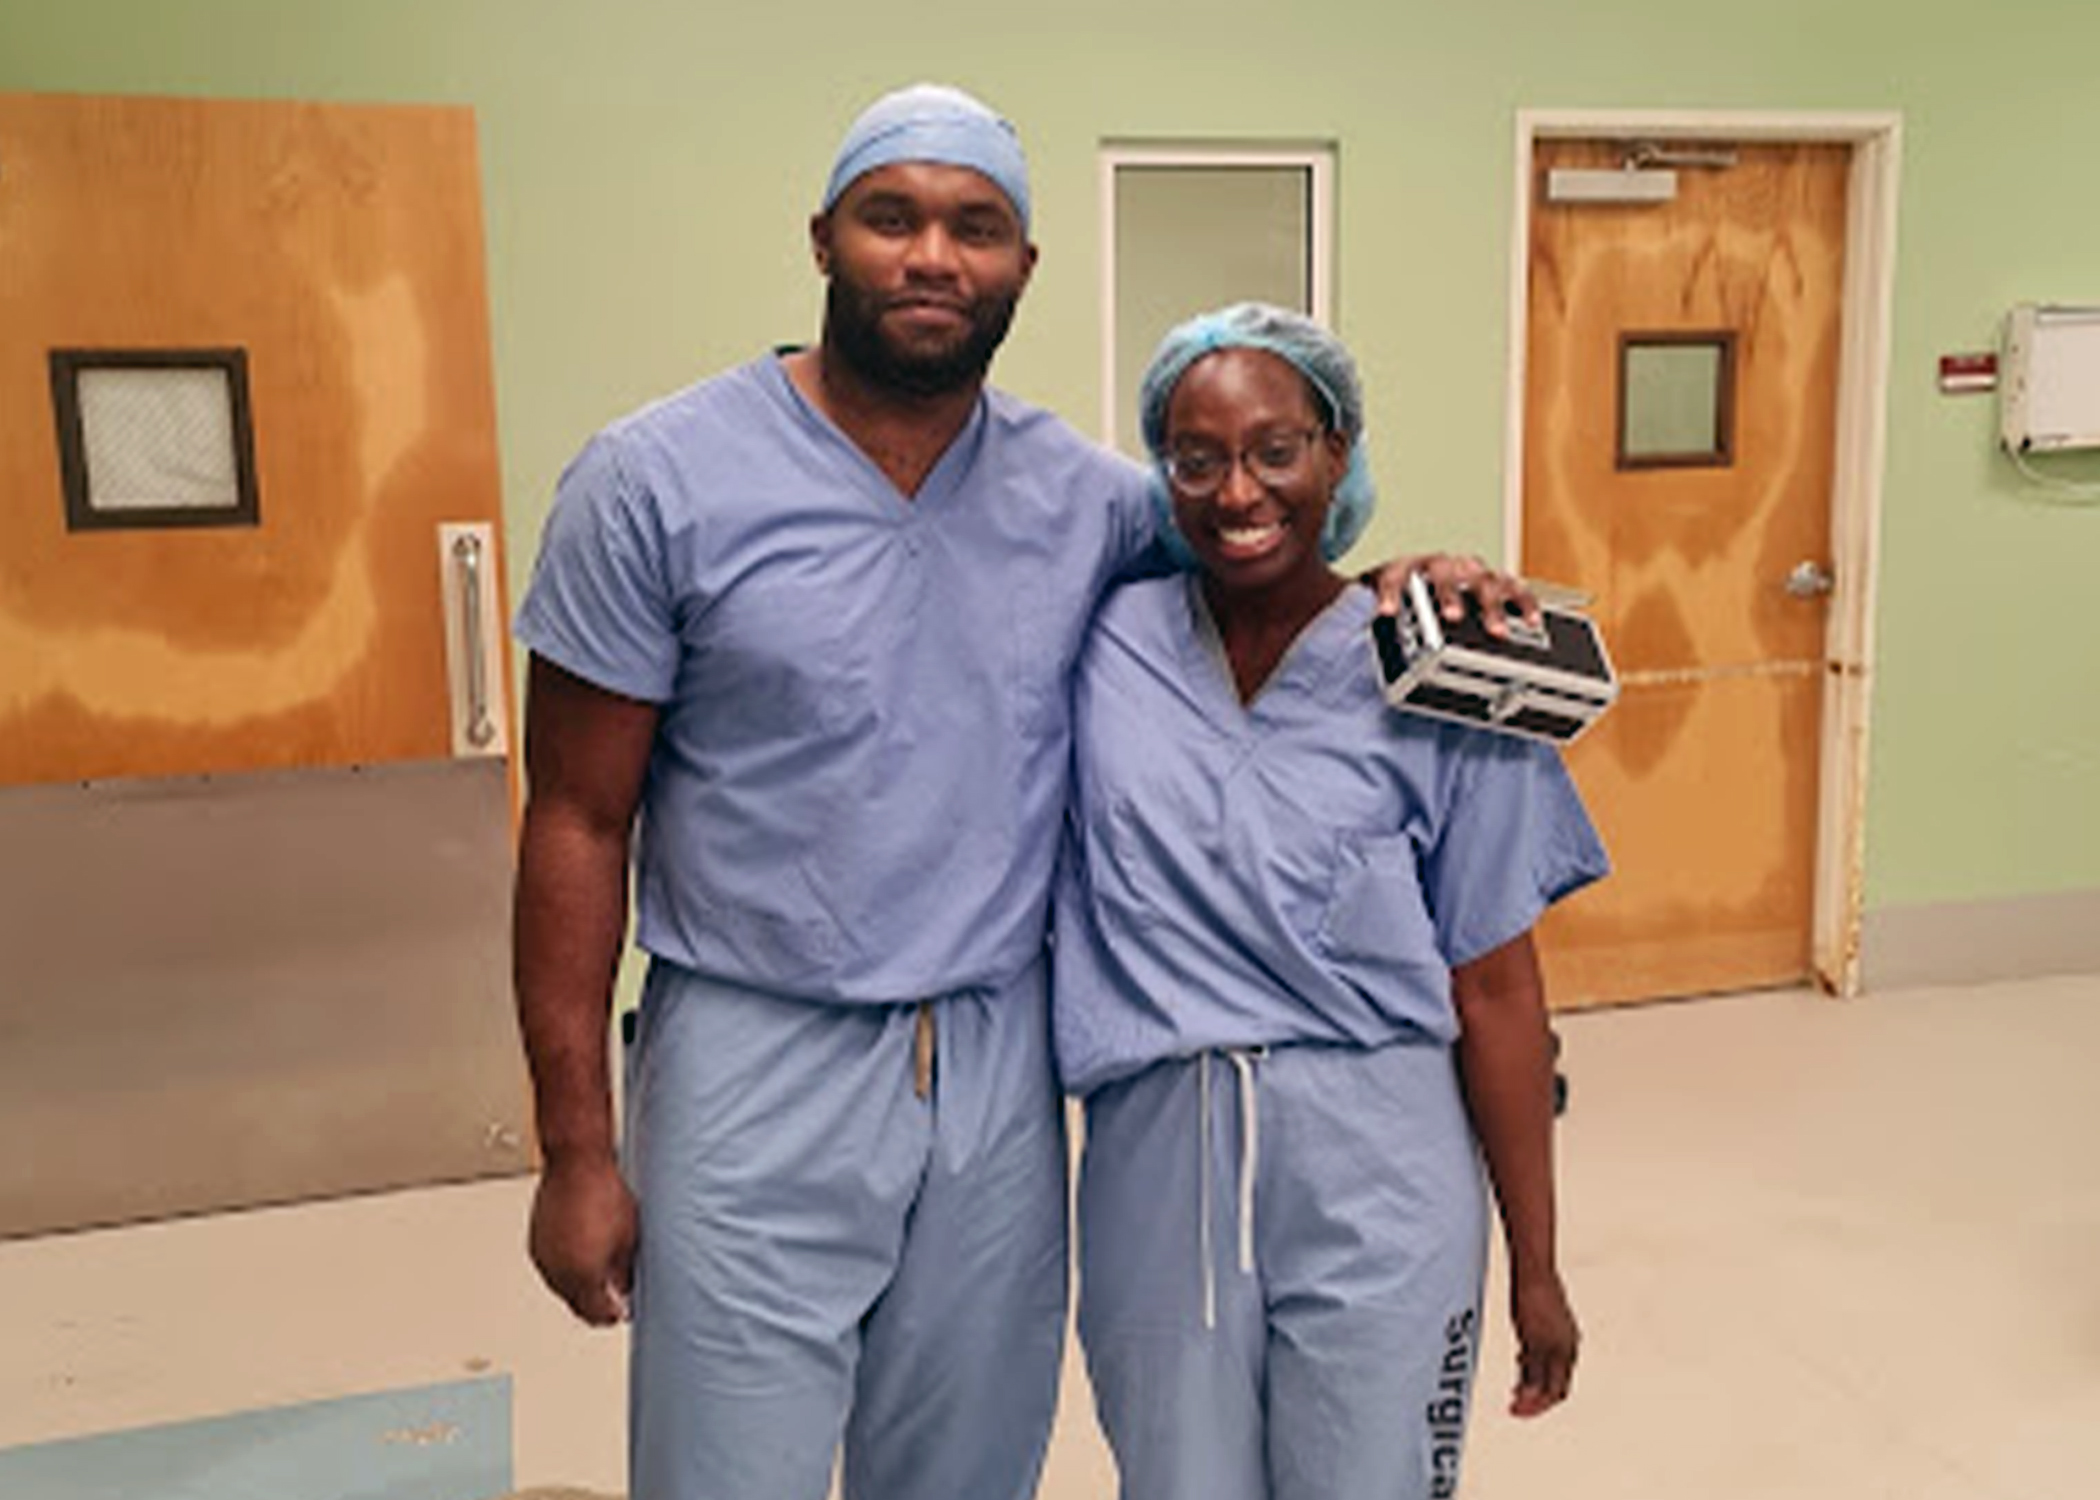 An image of Myron Rolle and Ashley Williams